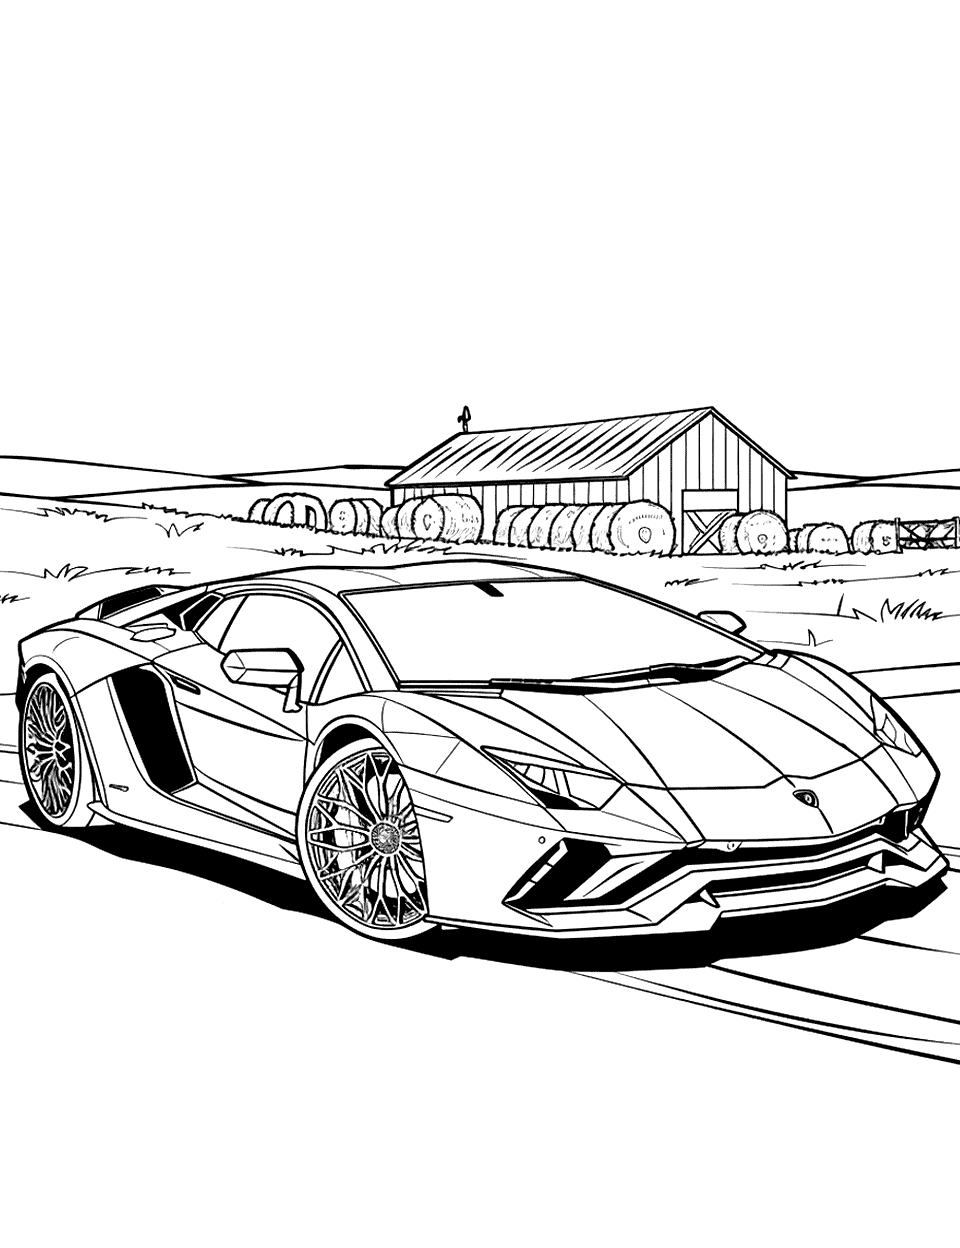 Farm Life Lamborghini Coloring Page - A Lamborghini parked on a farm, with hay bales and a barn in the background.